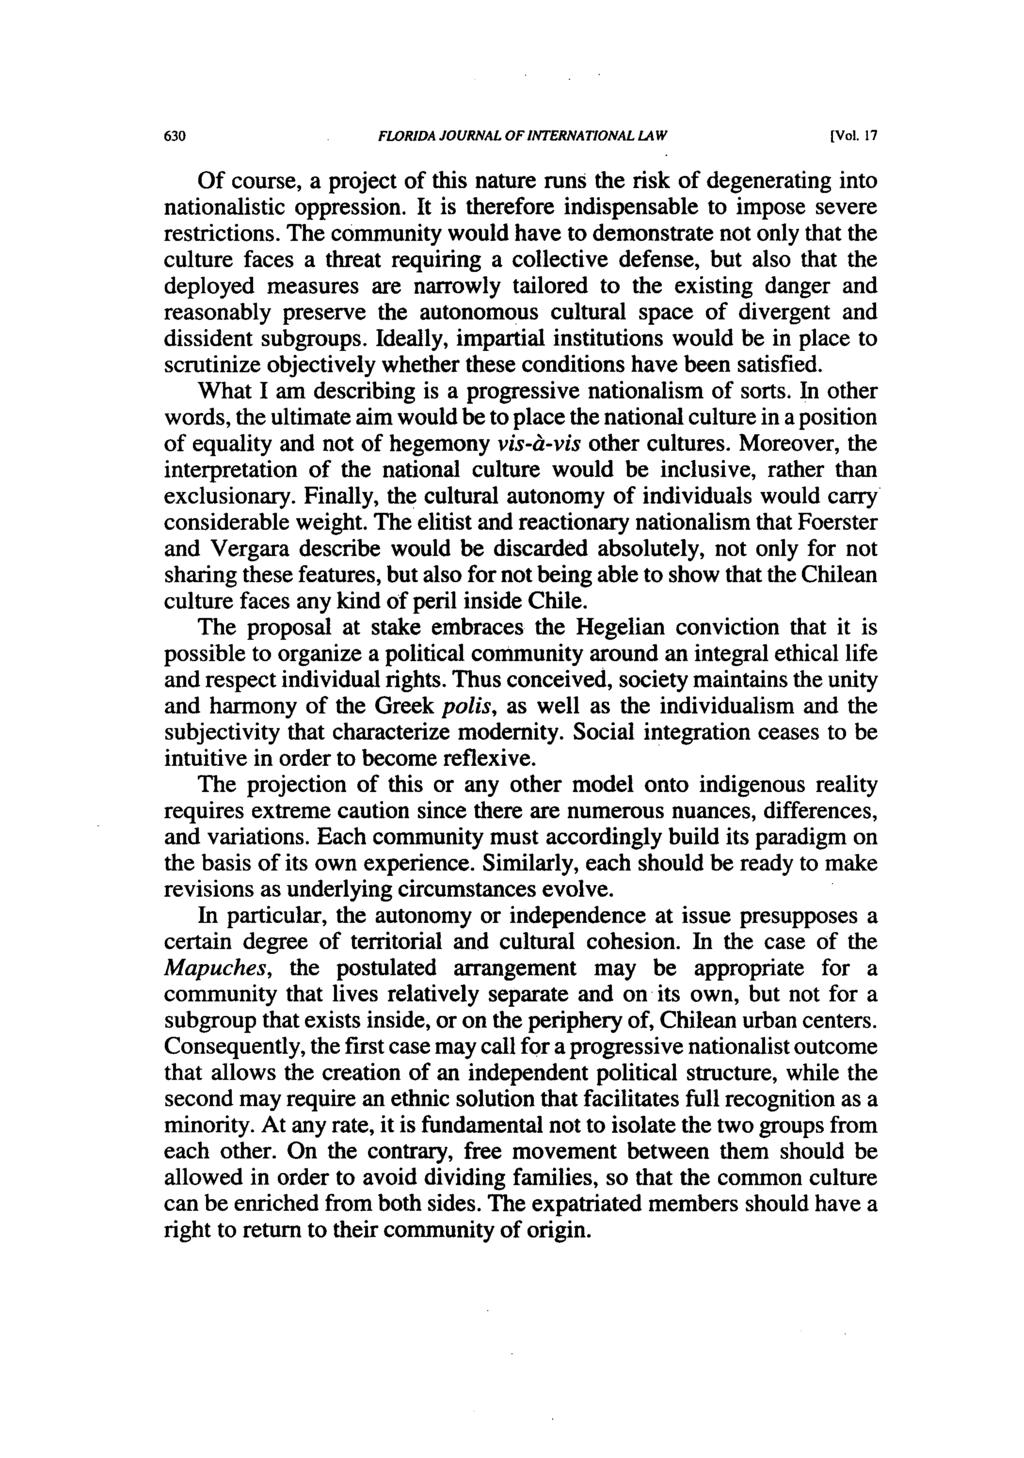 FLORIDA JOURNAL OF INTERNATIONAL LAW [Vol. 17 Of course, a project of this nature runs the risk of degenerating into nationalistic oppression.